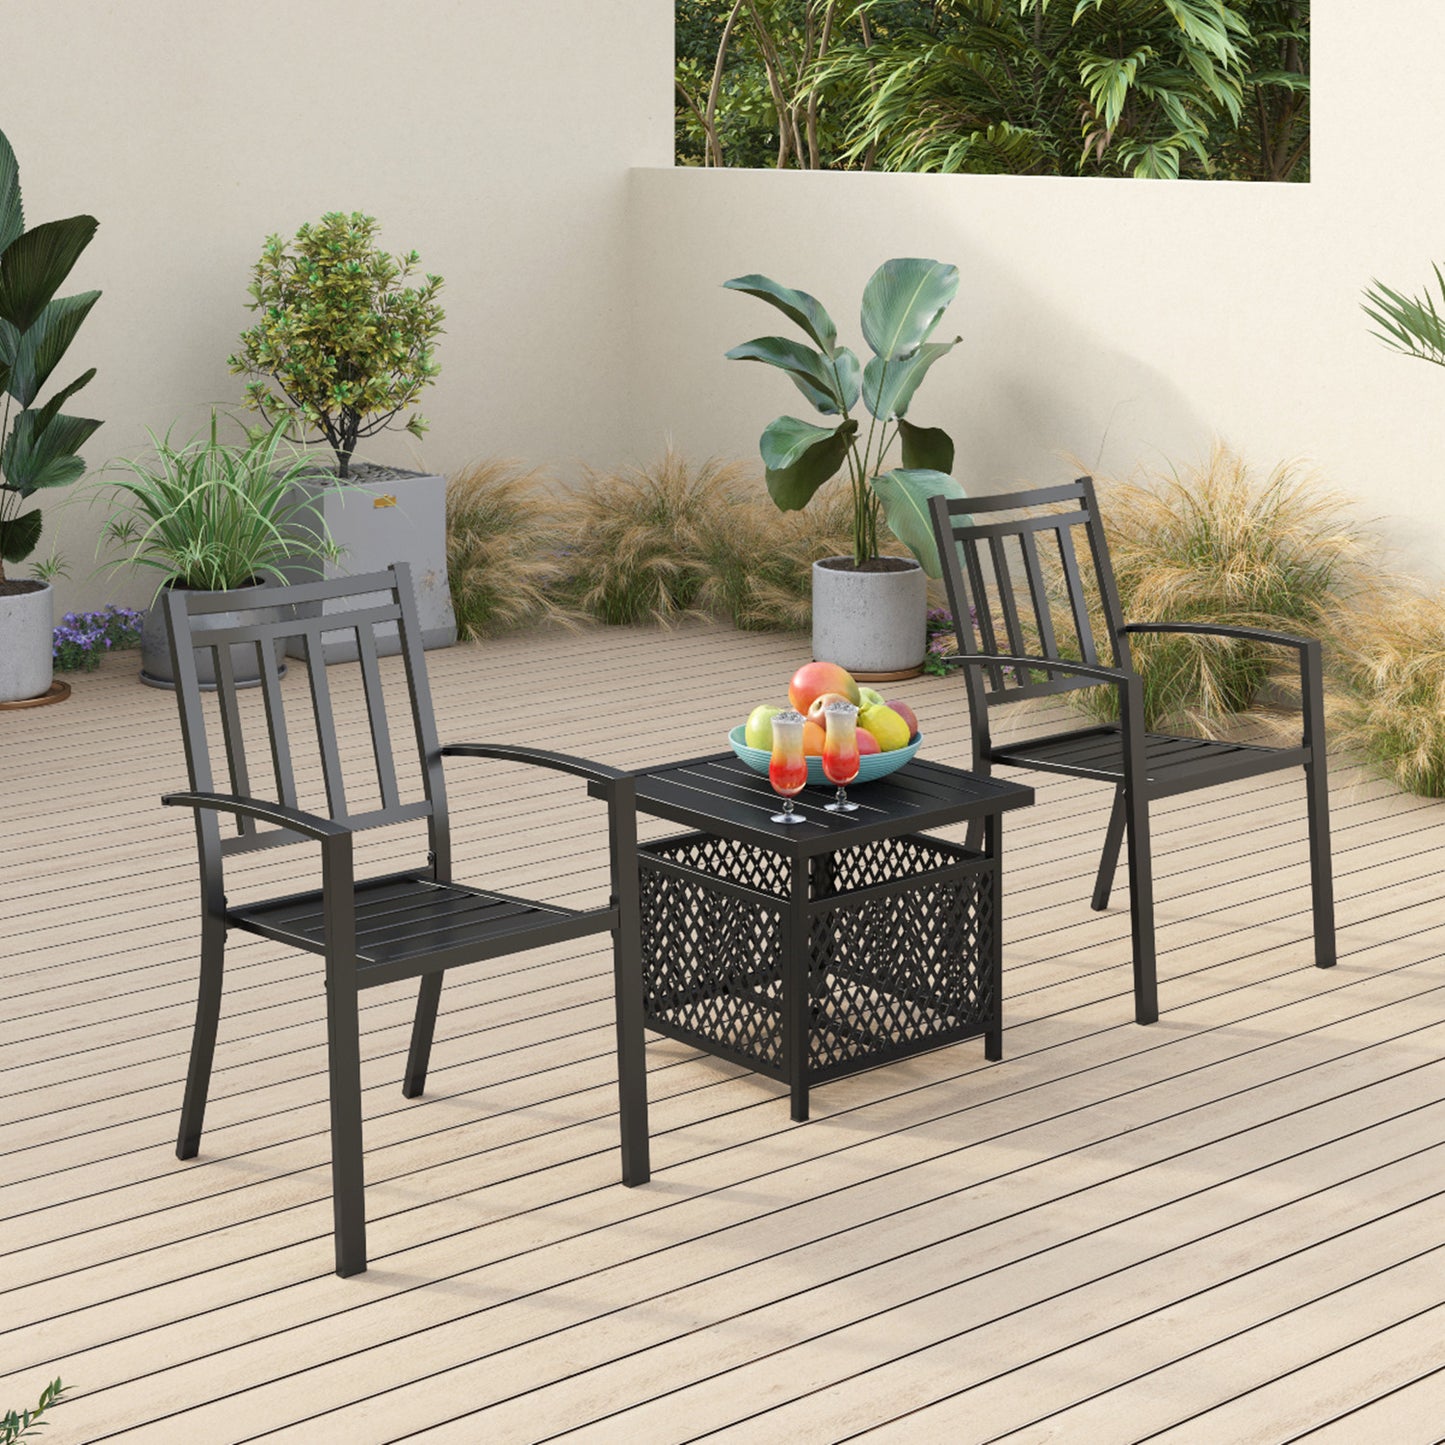 Sophia & William 3 Pieces Patio Bistro Set Metal Dining Chairs with Side Table - Black